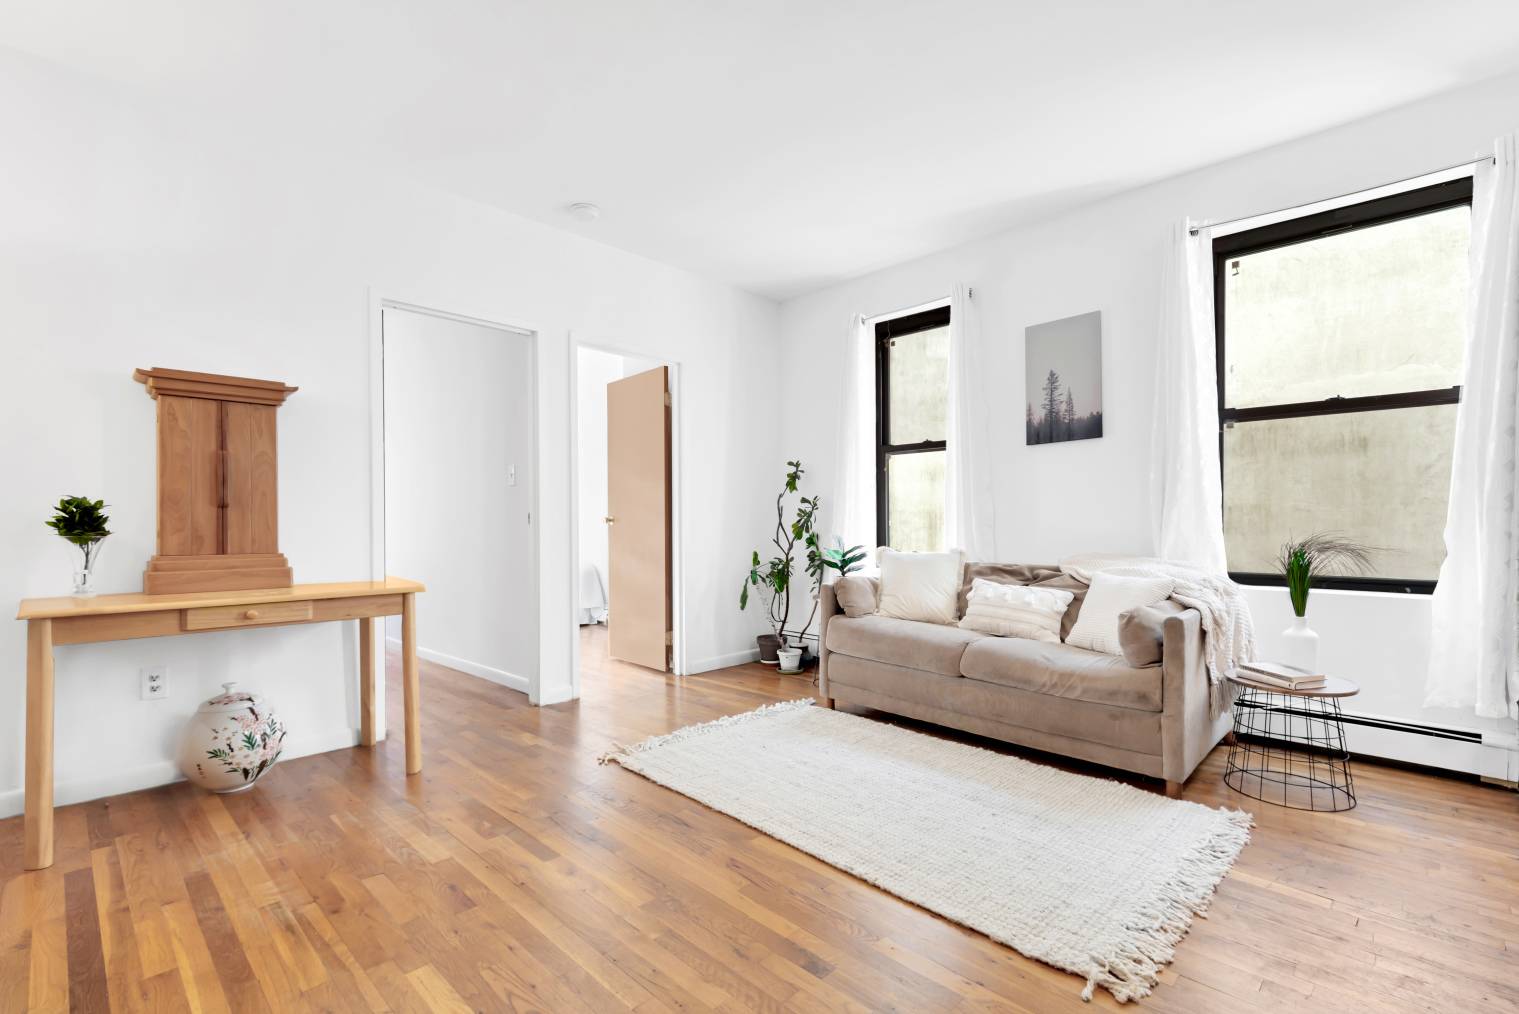 Sweet and special two bedroom apartment ideally located in Park Slope.